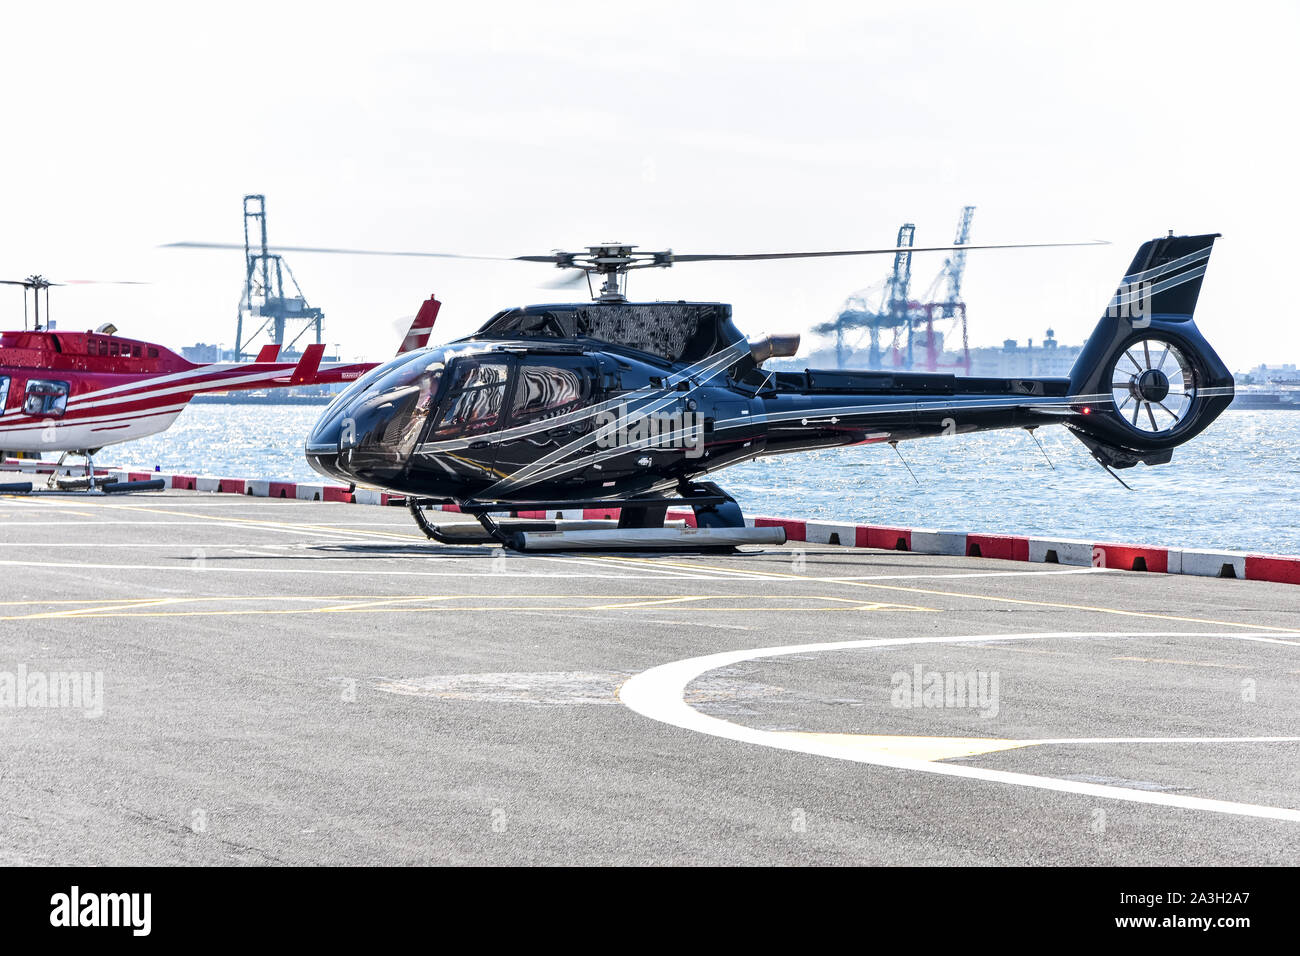 Tour helicopter ready to take off. NYC, USA Stock Photo